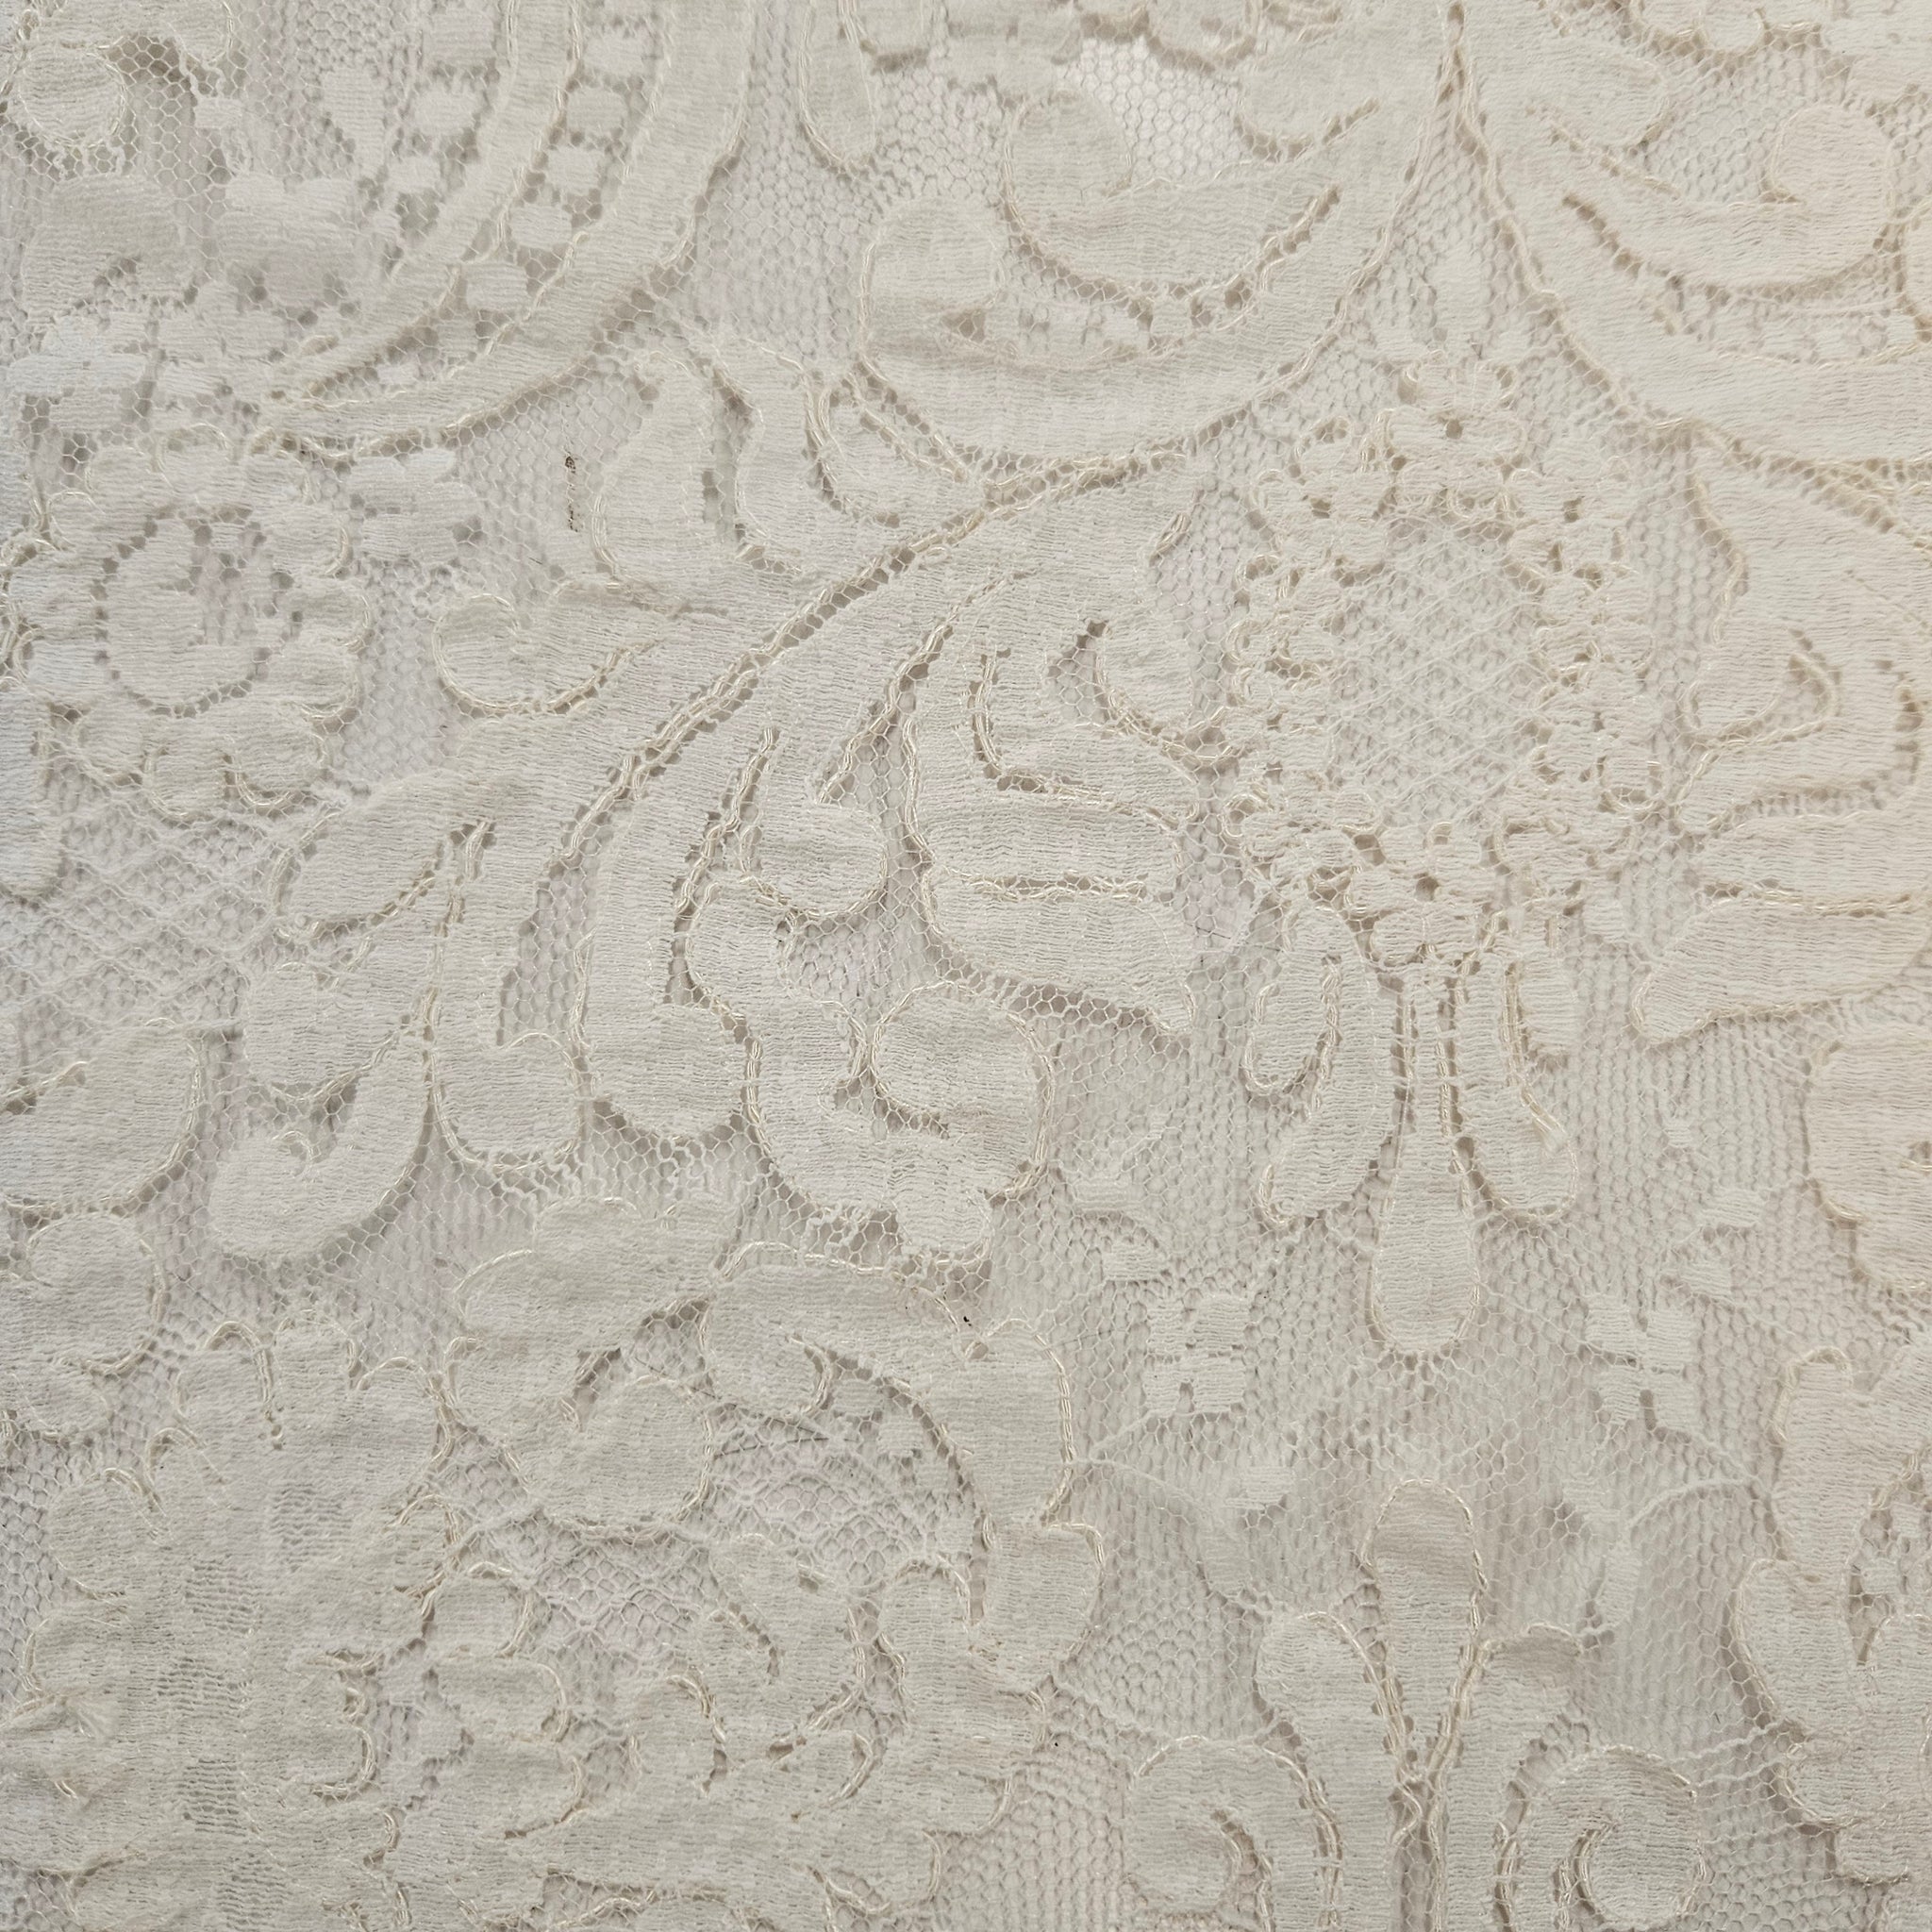 Lace Flower Fabric